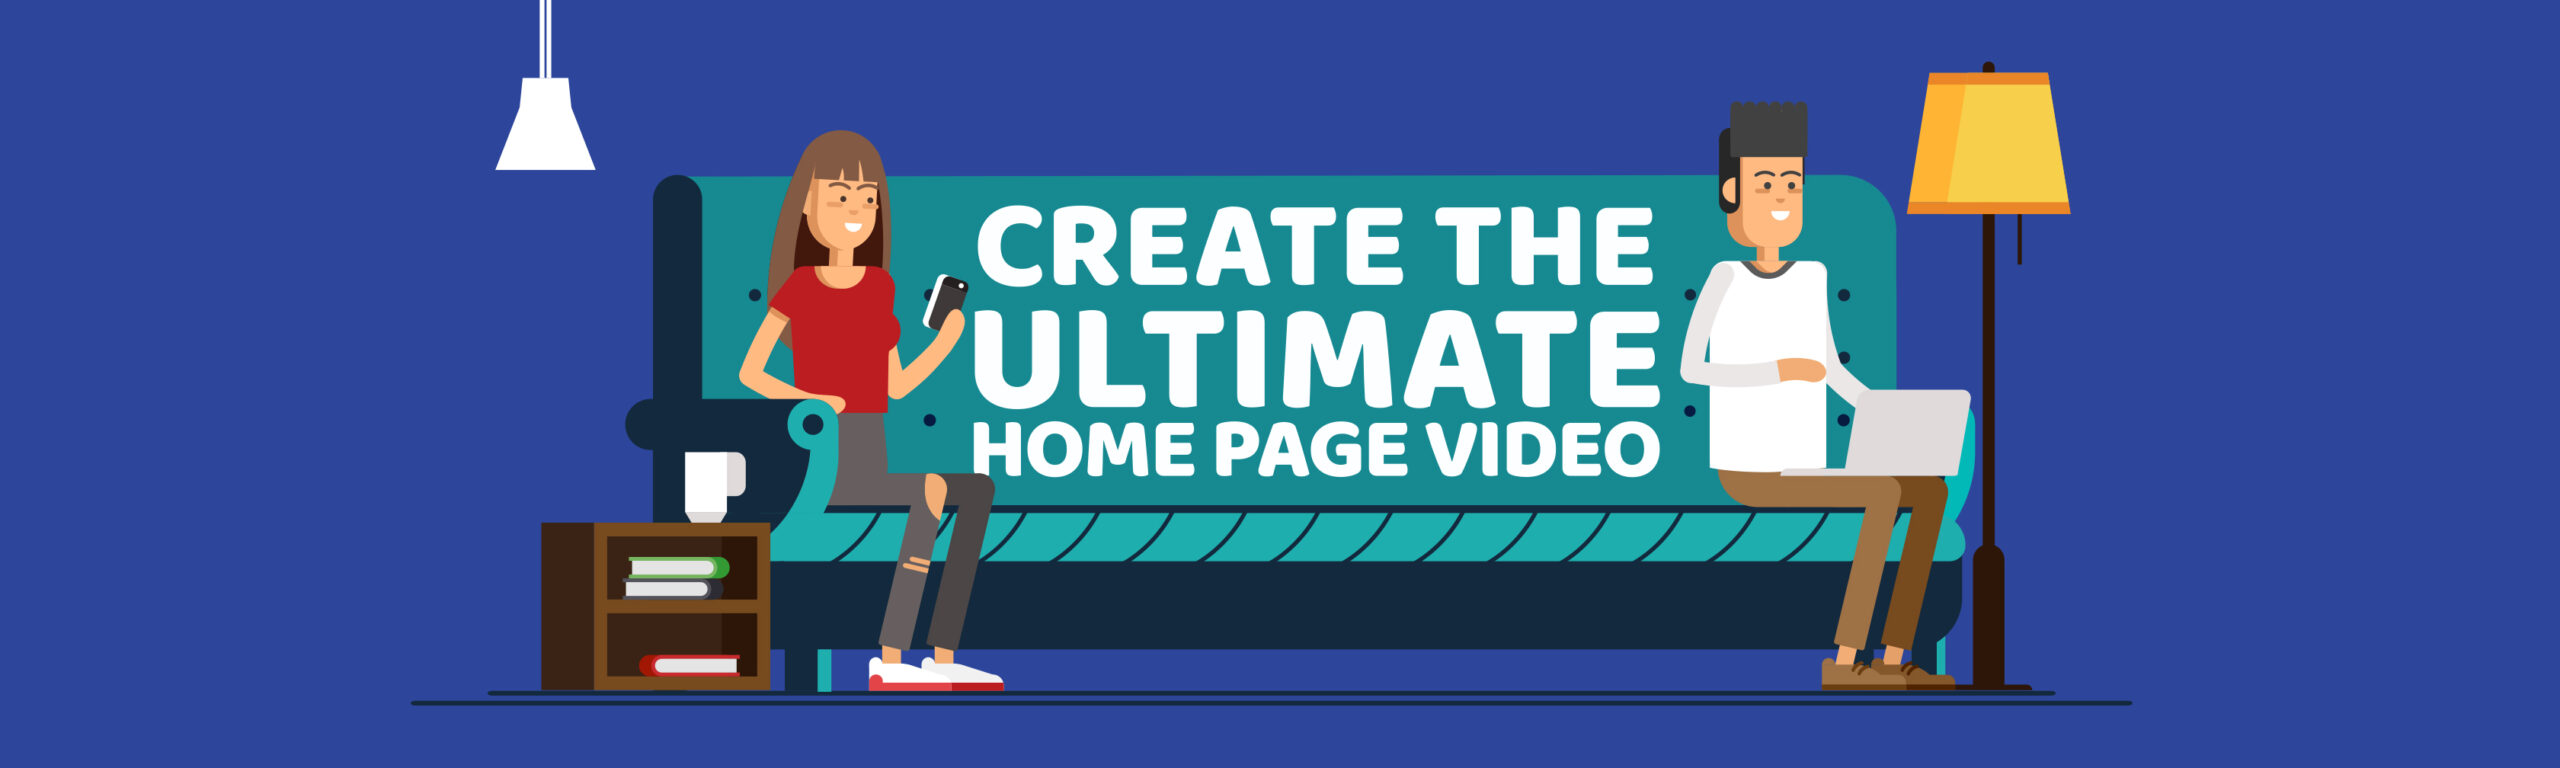 Ultimate-Home-Page-Video-BG